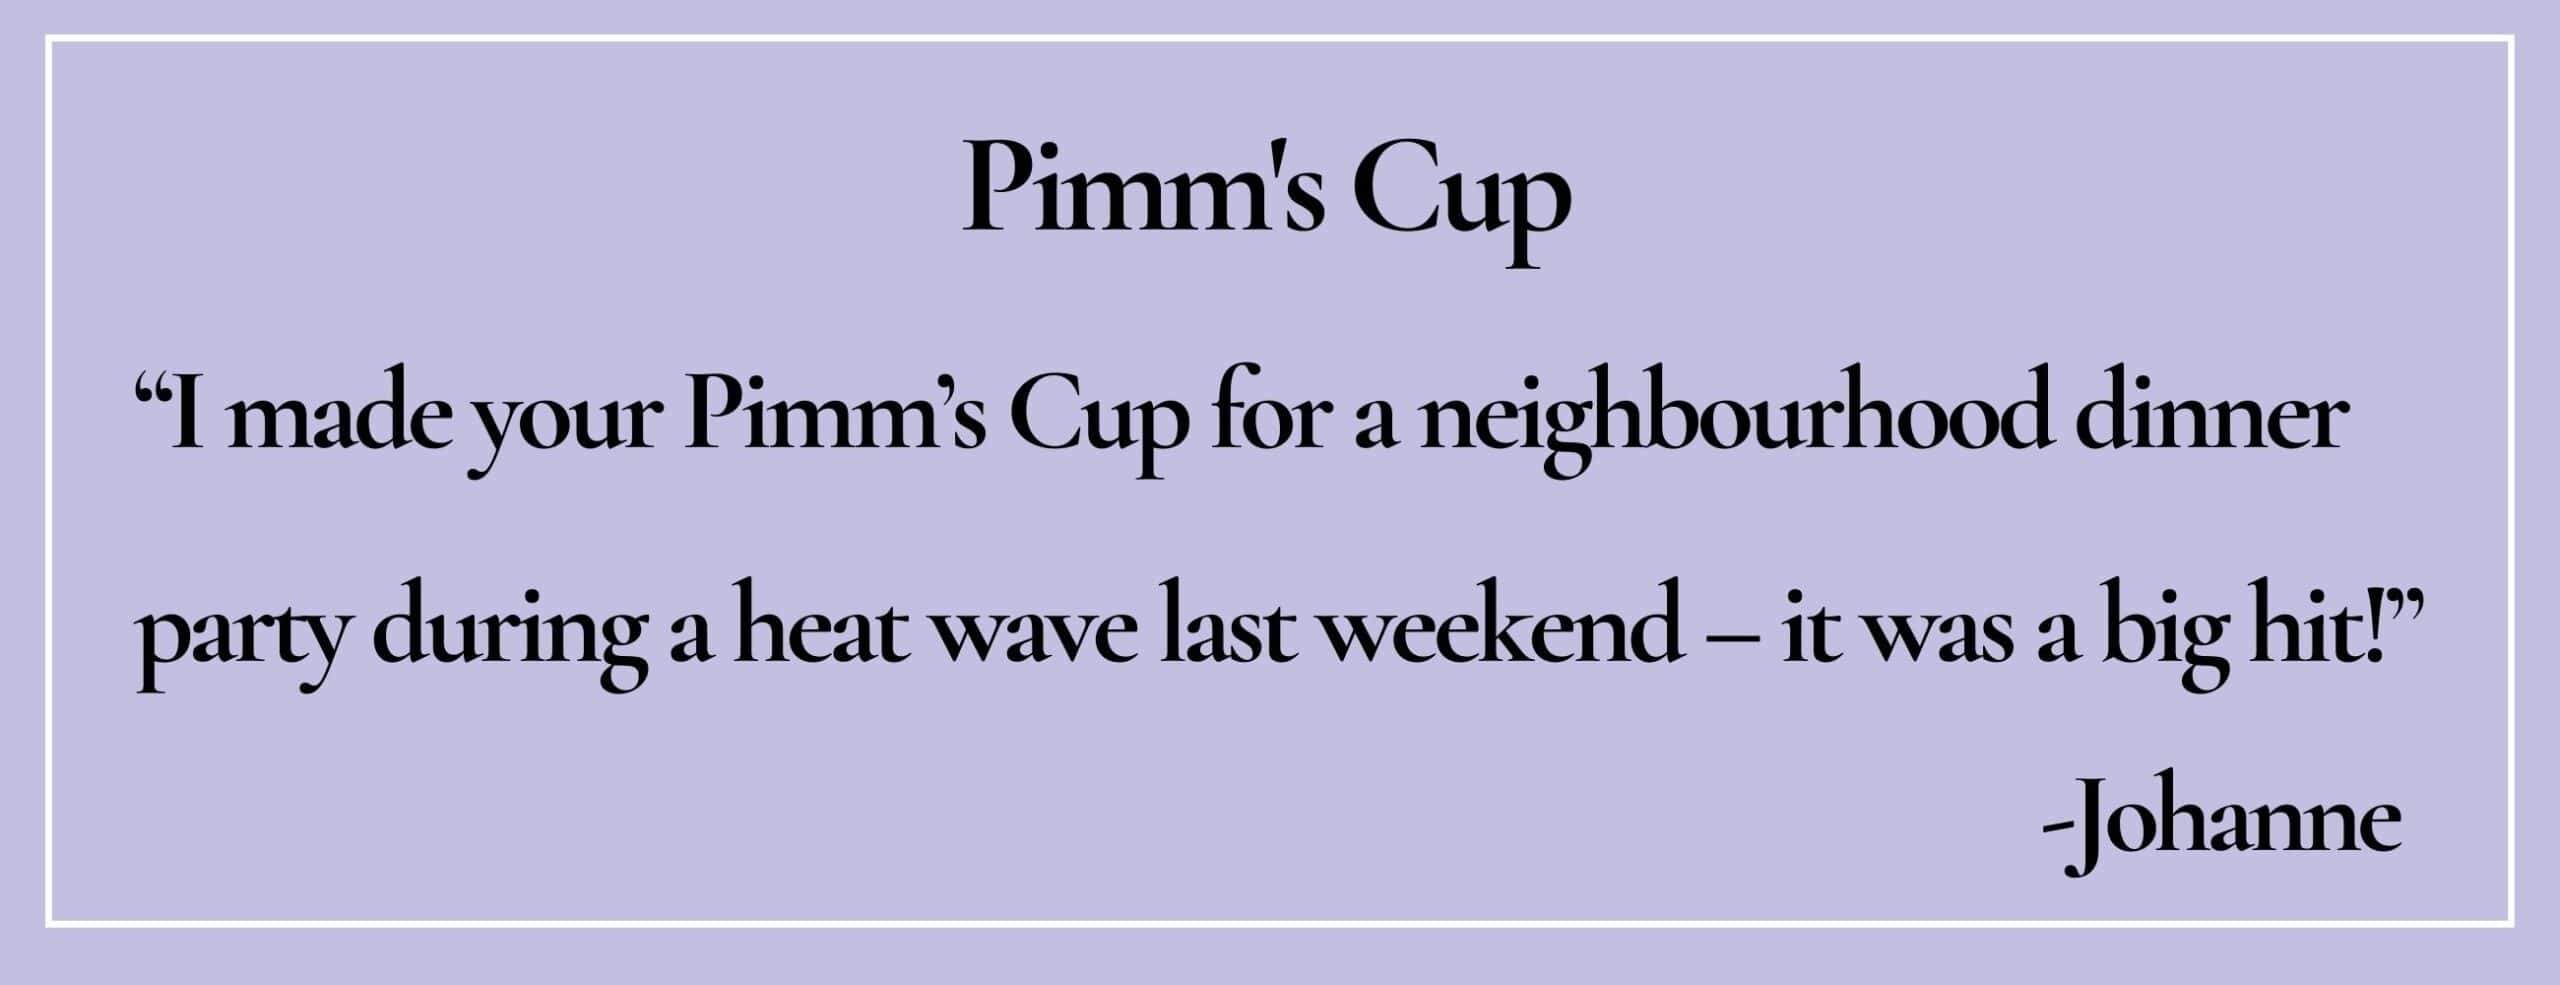 text box with quote: "I made your Pimm’s Cup for a neighbourhood dinner party... it was a big hit!"-Johanne